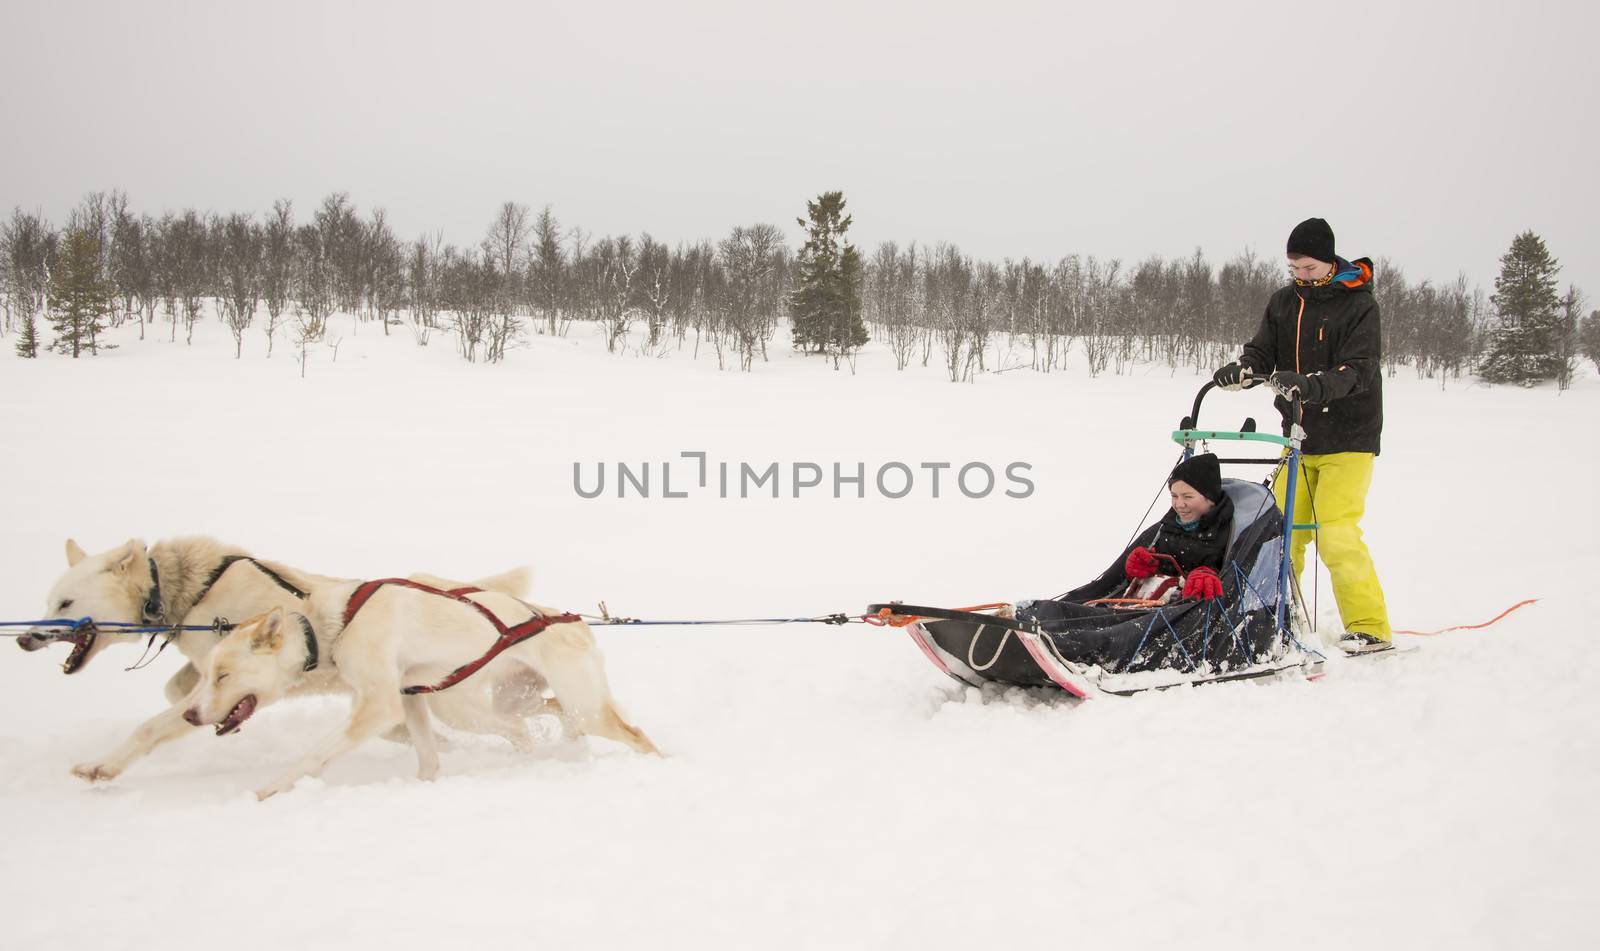 Boys on a sleigh driving a dogsled